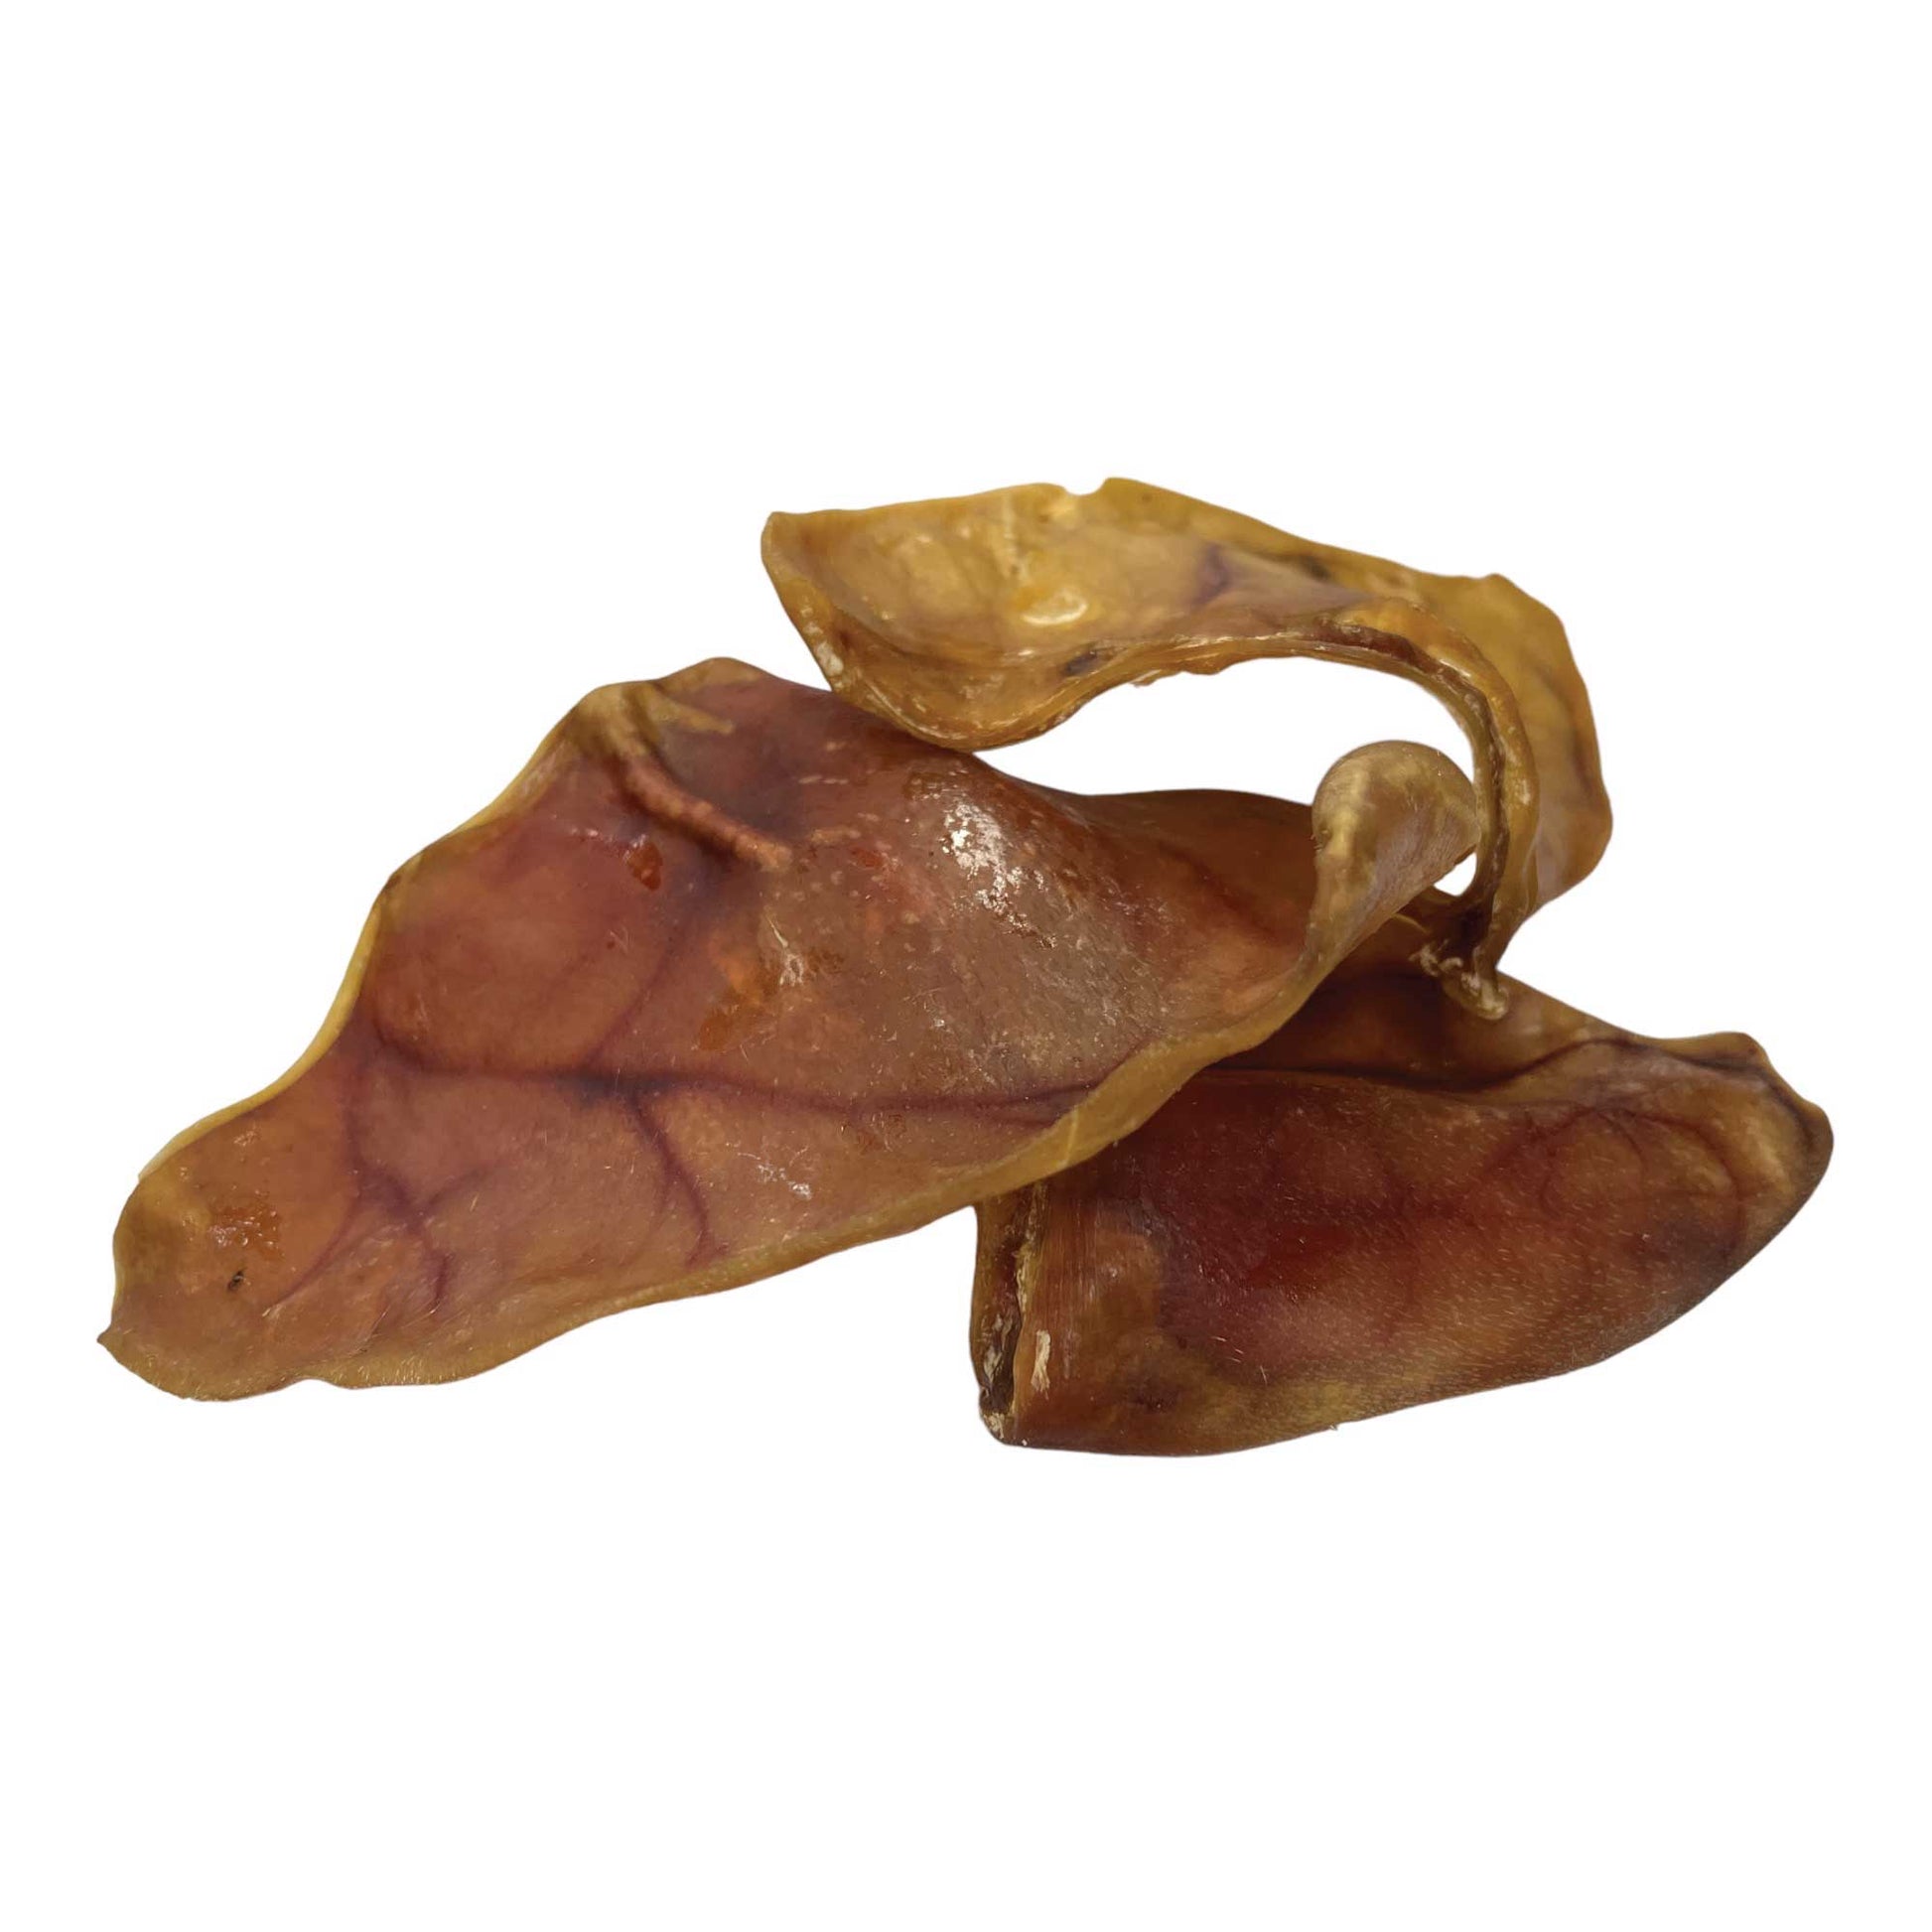 Dog Treat Large Pig Ears Whole - Dehydrated Australian Healthy Puppy Chew